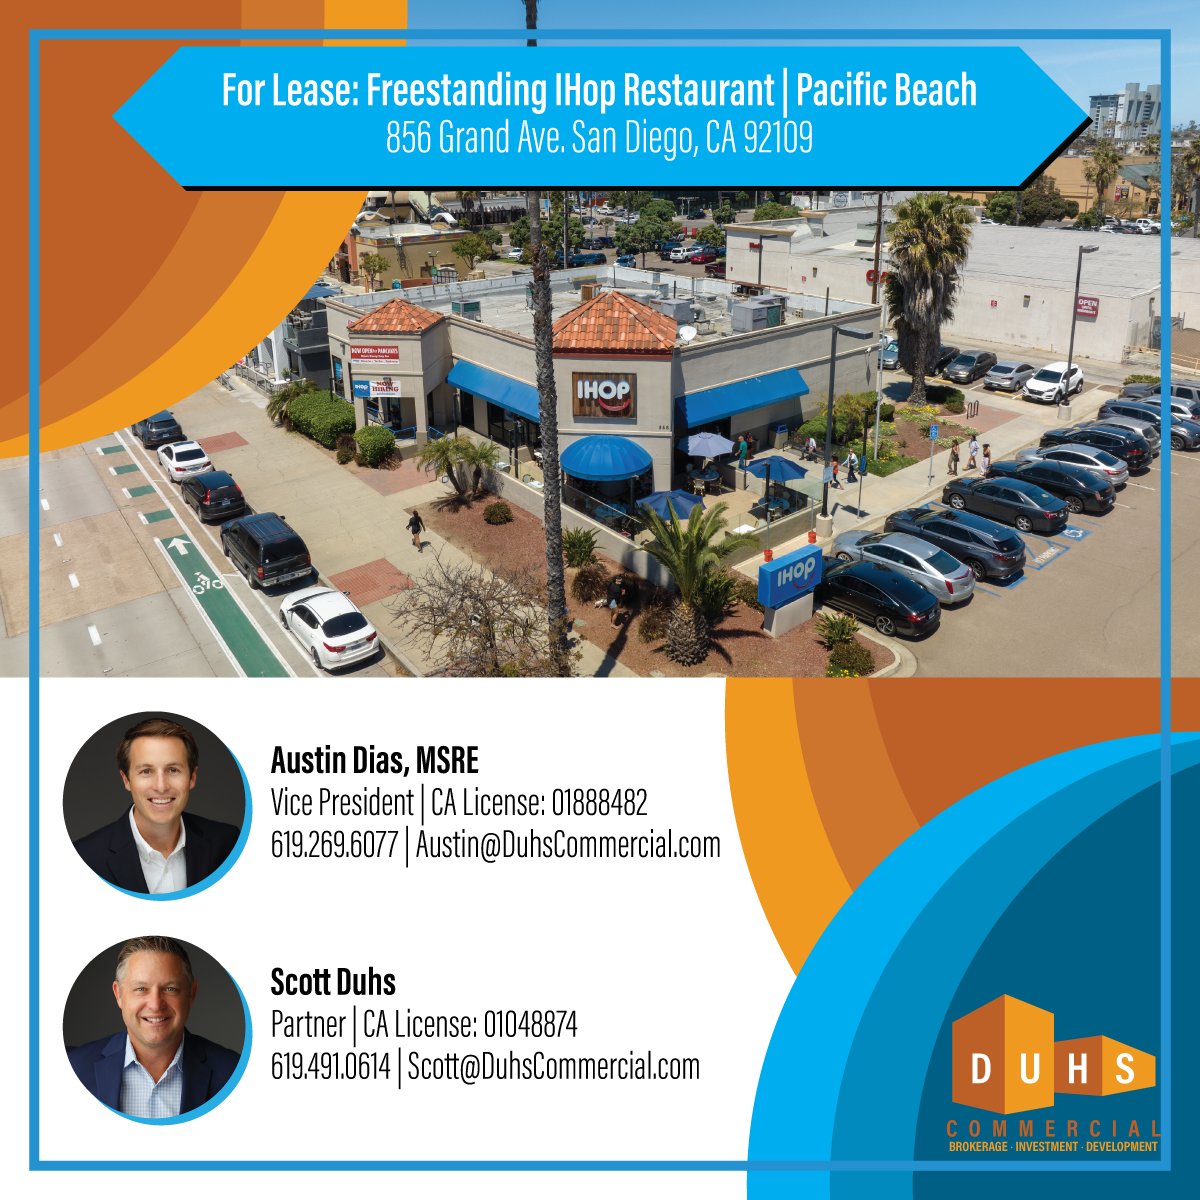 For Lease: Freestanding IHop Restaurant | Pacific Beach

-Top Tourist Destination
-Freestanding Restaurant Opportunity
-Located on the main thoroughfare of Pacific Beach- Grand Ave.

#sandiegorealestate #sandiegcommercialrealestate #downtownsandiego #downtownsd